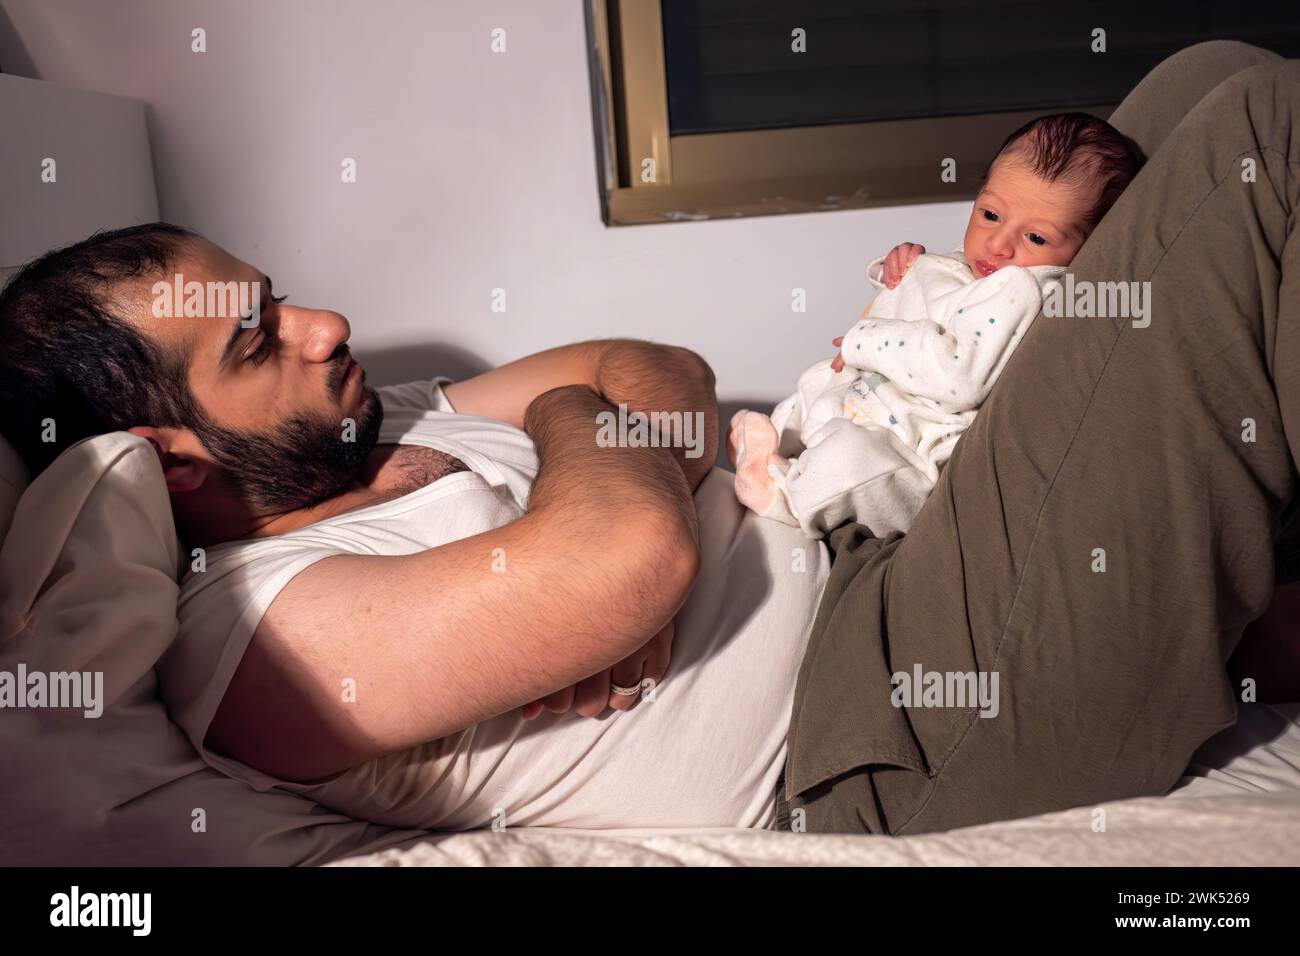 baby wake up during night and prevent parents from getting some sleep Stock Photo